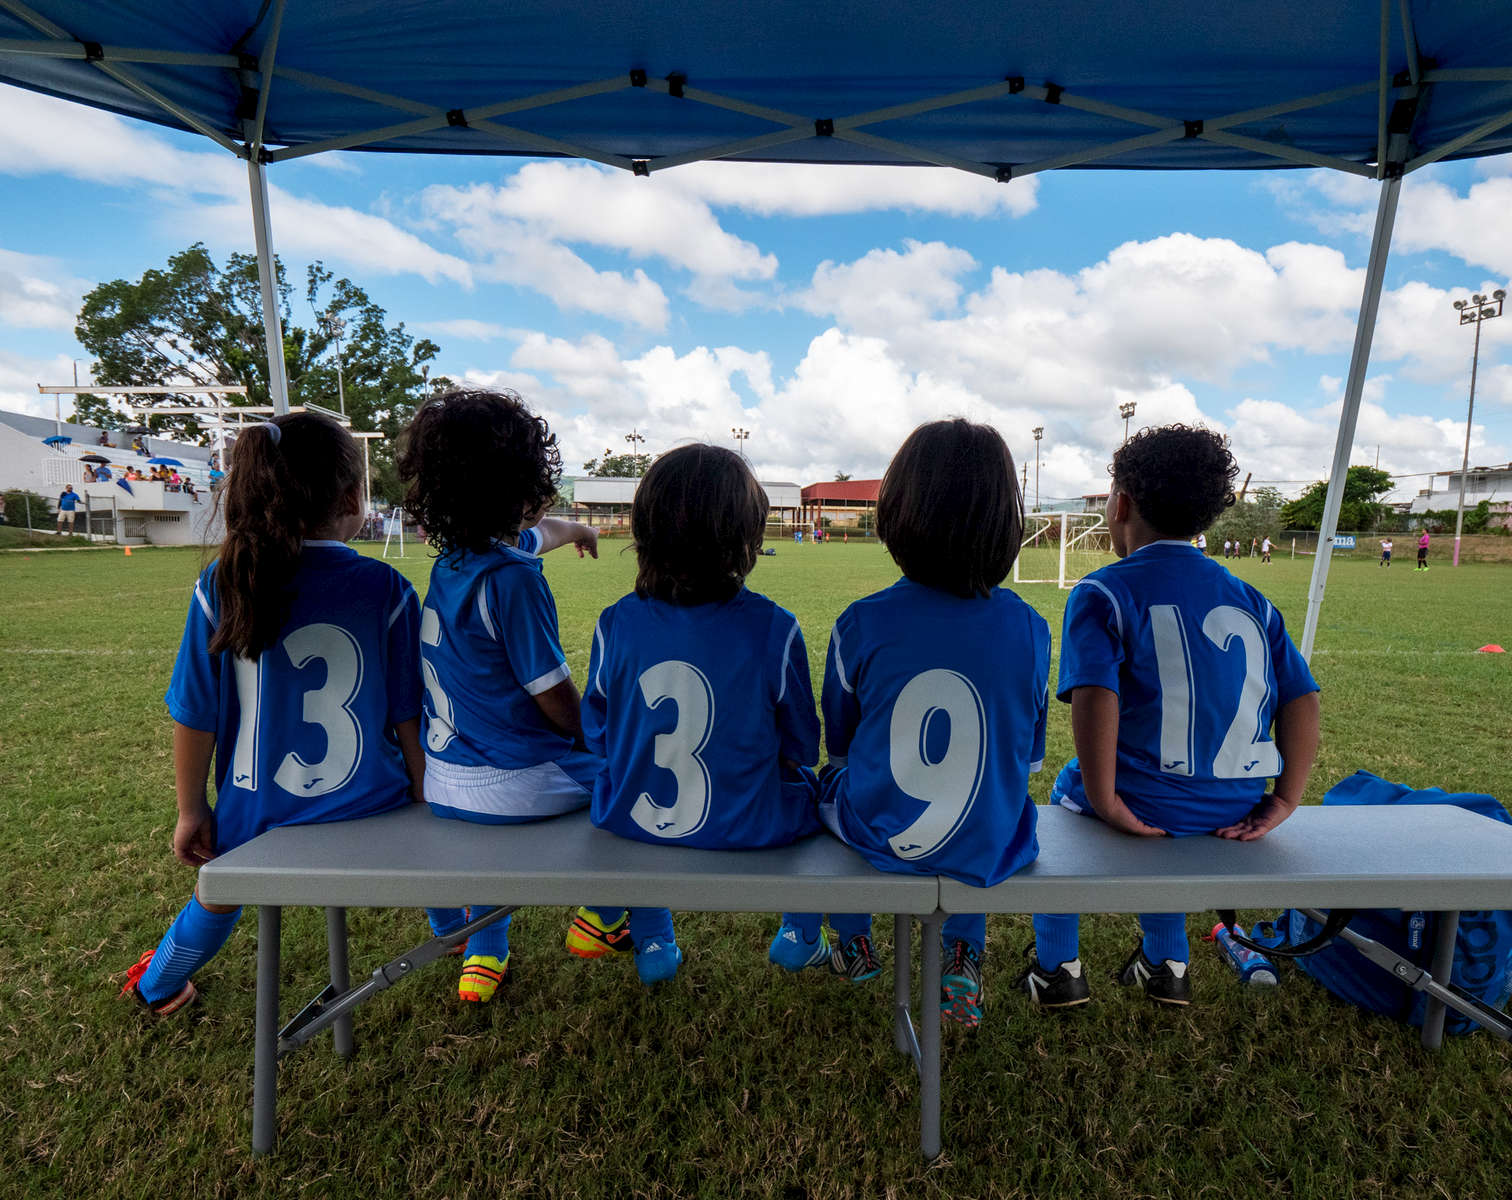 CAGUAS, PUERTO RICO - NOVEMBER 10: Children watch a Little League Soccer game on November 10, 2018 in Caguas, Puerto Rico. The effort continues in Puerto Rico to remain and rebuild more than one year after the Hurricane Maria hit and devastated the island on September 20, 2017. The official number of deaths from the disaster is 2,975. 